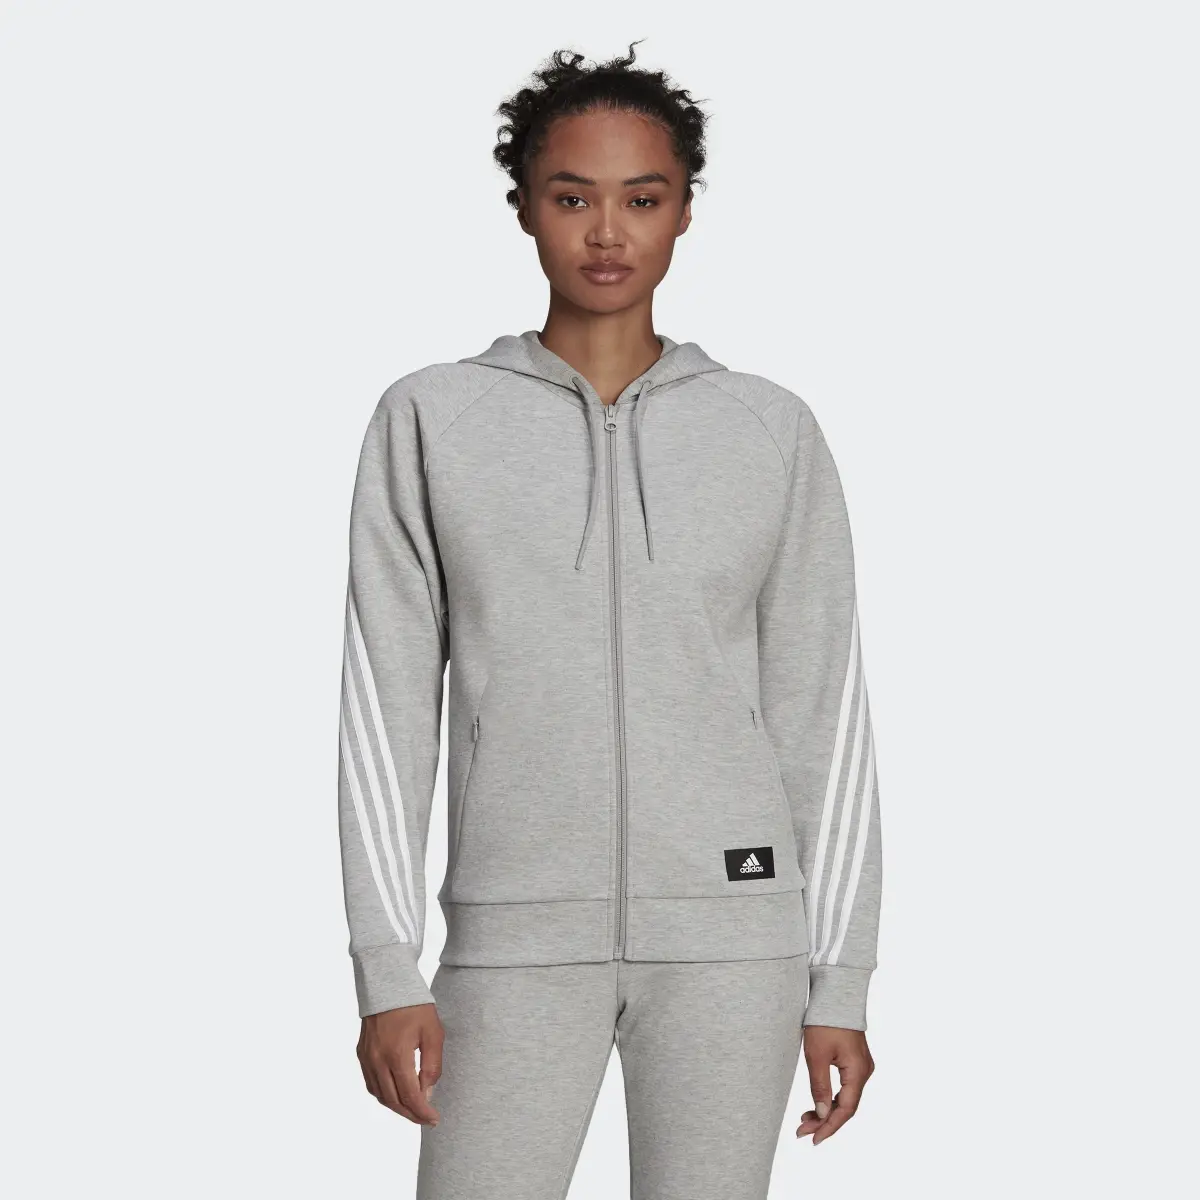 Adidas Sportswear Future Icons 3-Stripes Hooded Track Top. 2